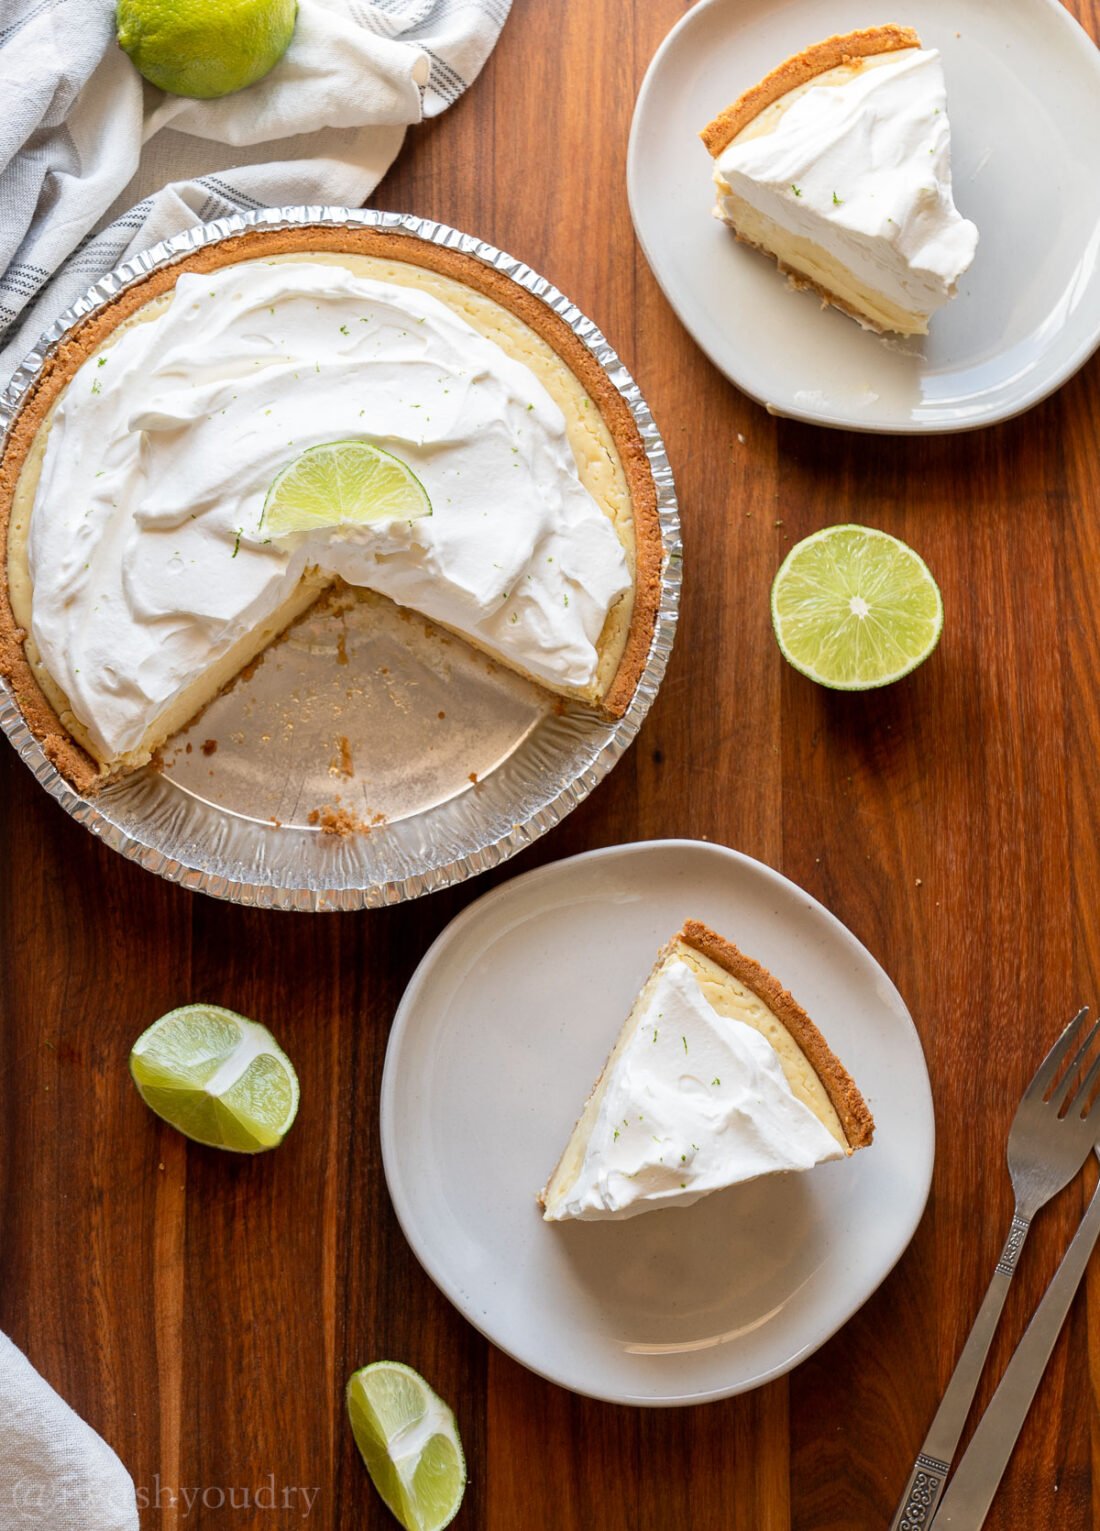 wooden surface with sliced key lime pie on white plates.